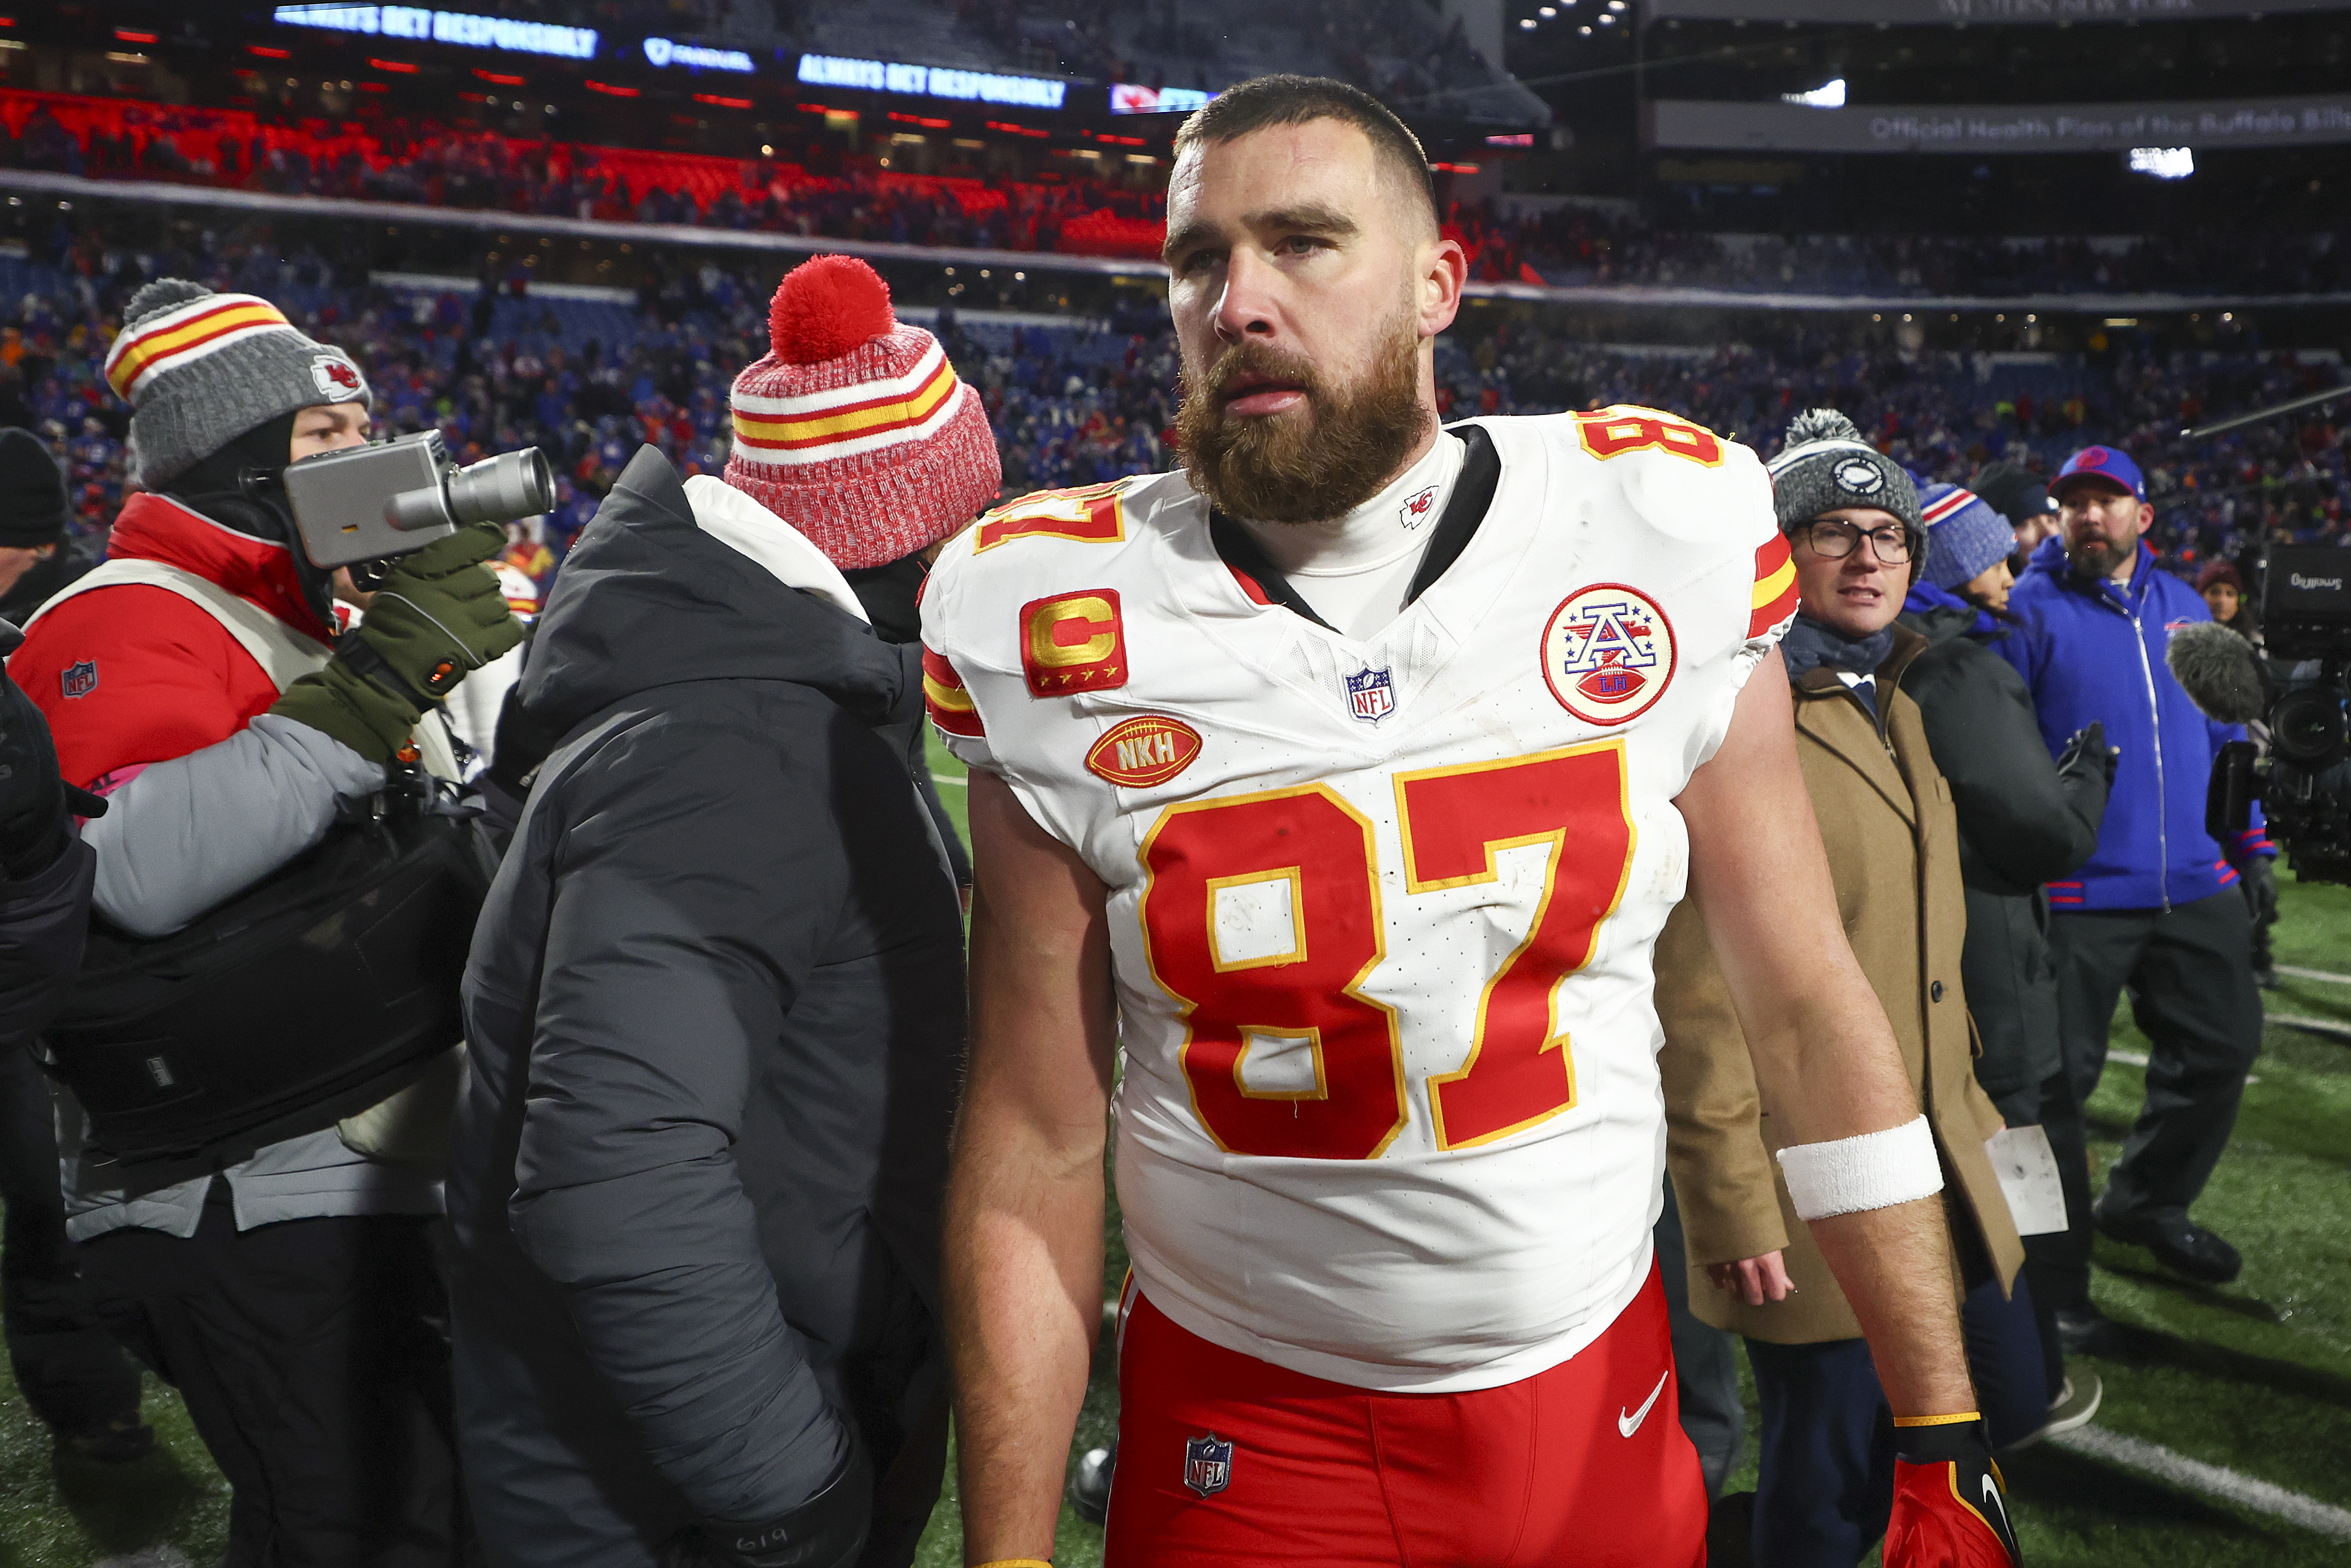 Taylor Swift tips stadium worker $100 at Travis Kelce's Chiefs game